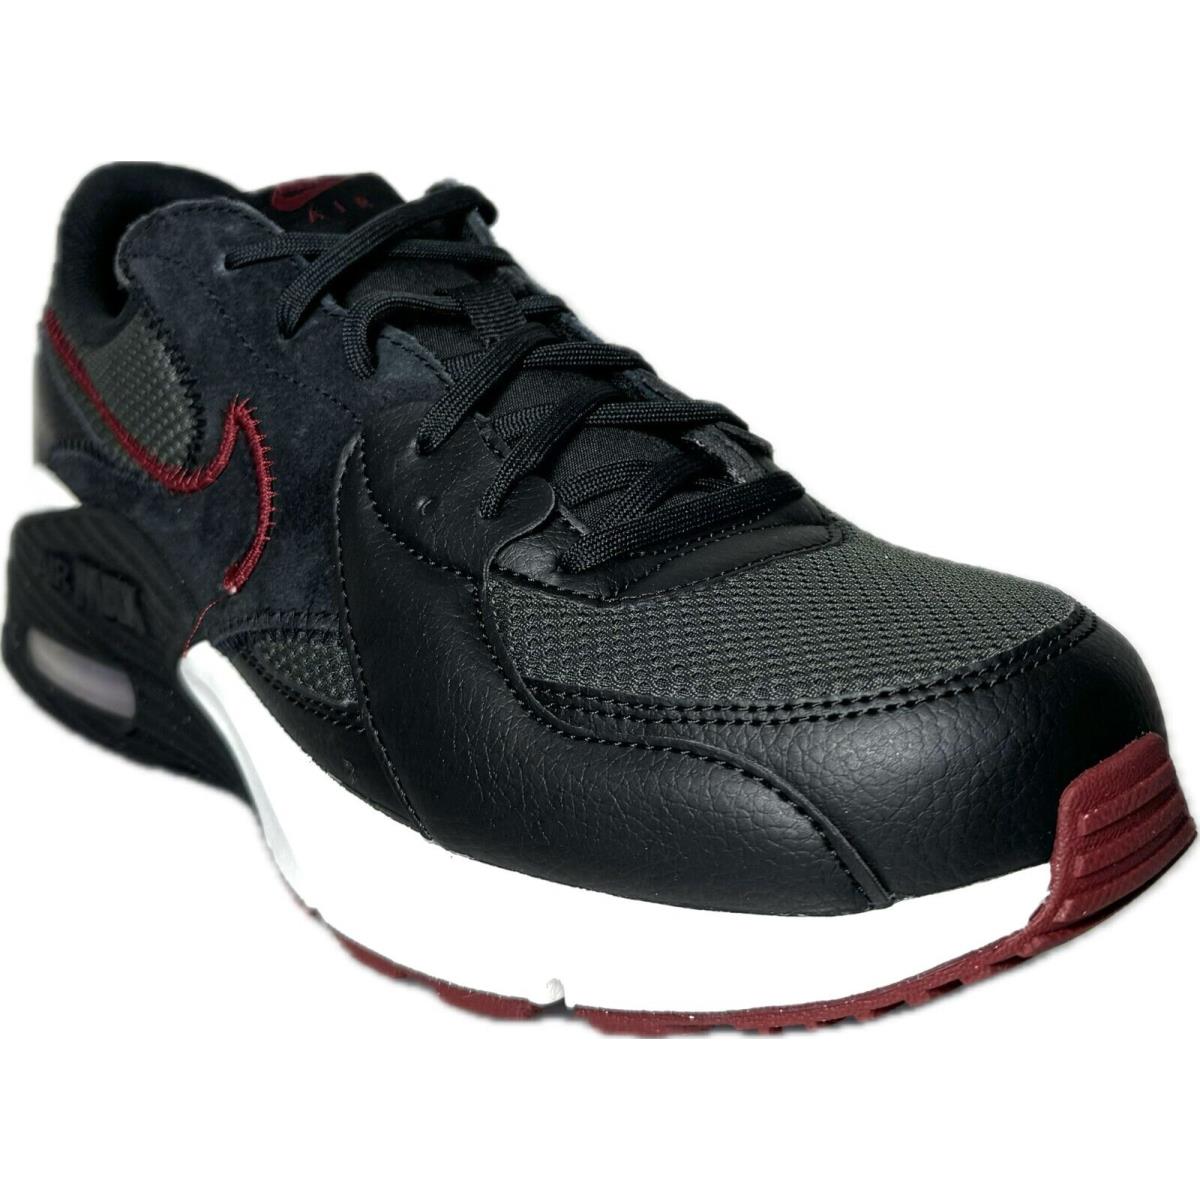 Nike Air Max Excee Men`s Black White Maroon Running Shoes Sneakers DQ3993-001 - Black-White-Maroon